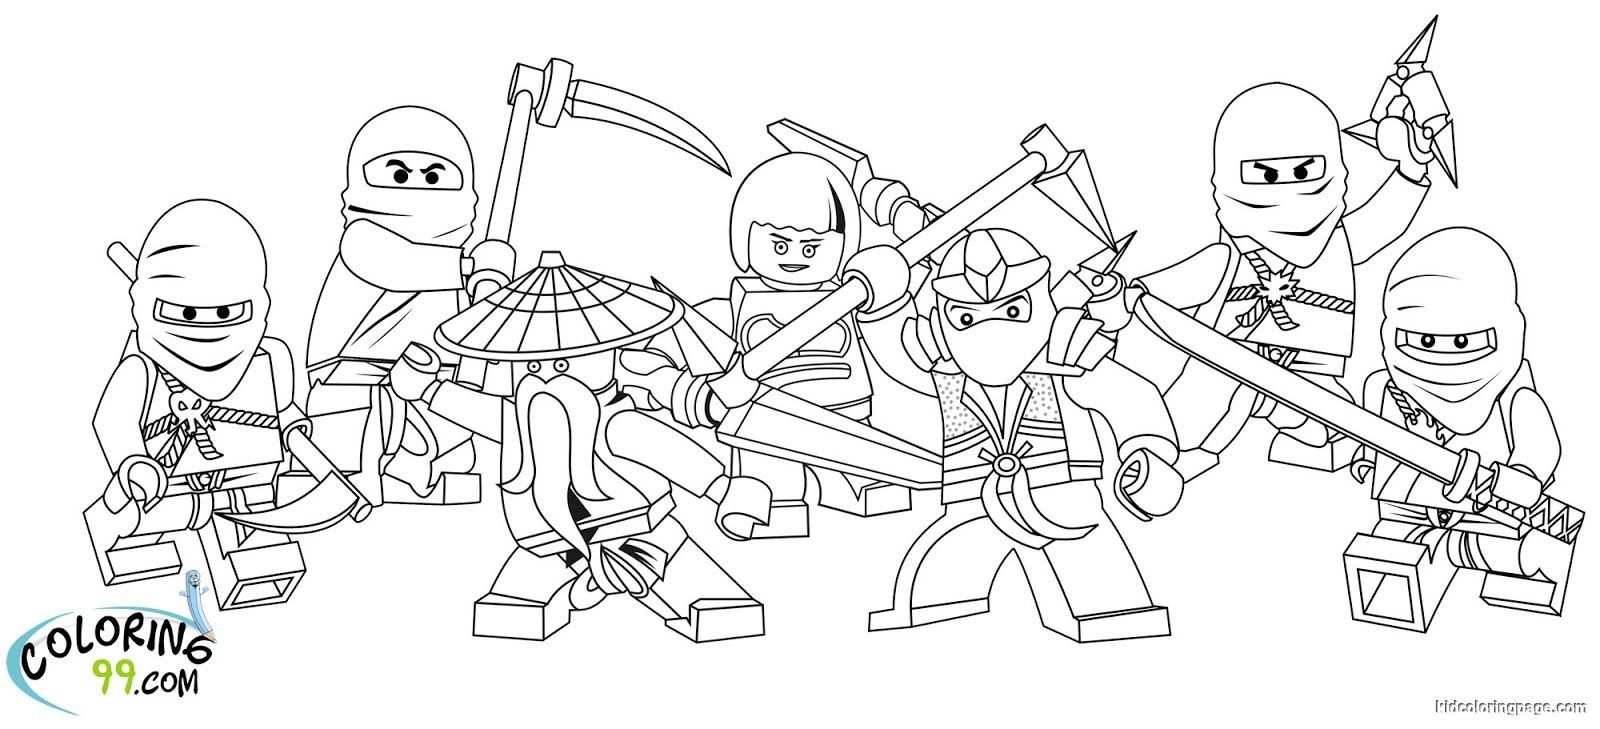 Lego Ninjago Team Coloring Pages With Images Darmowe